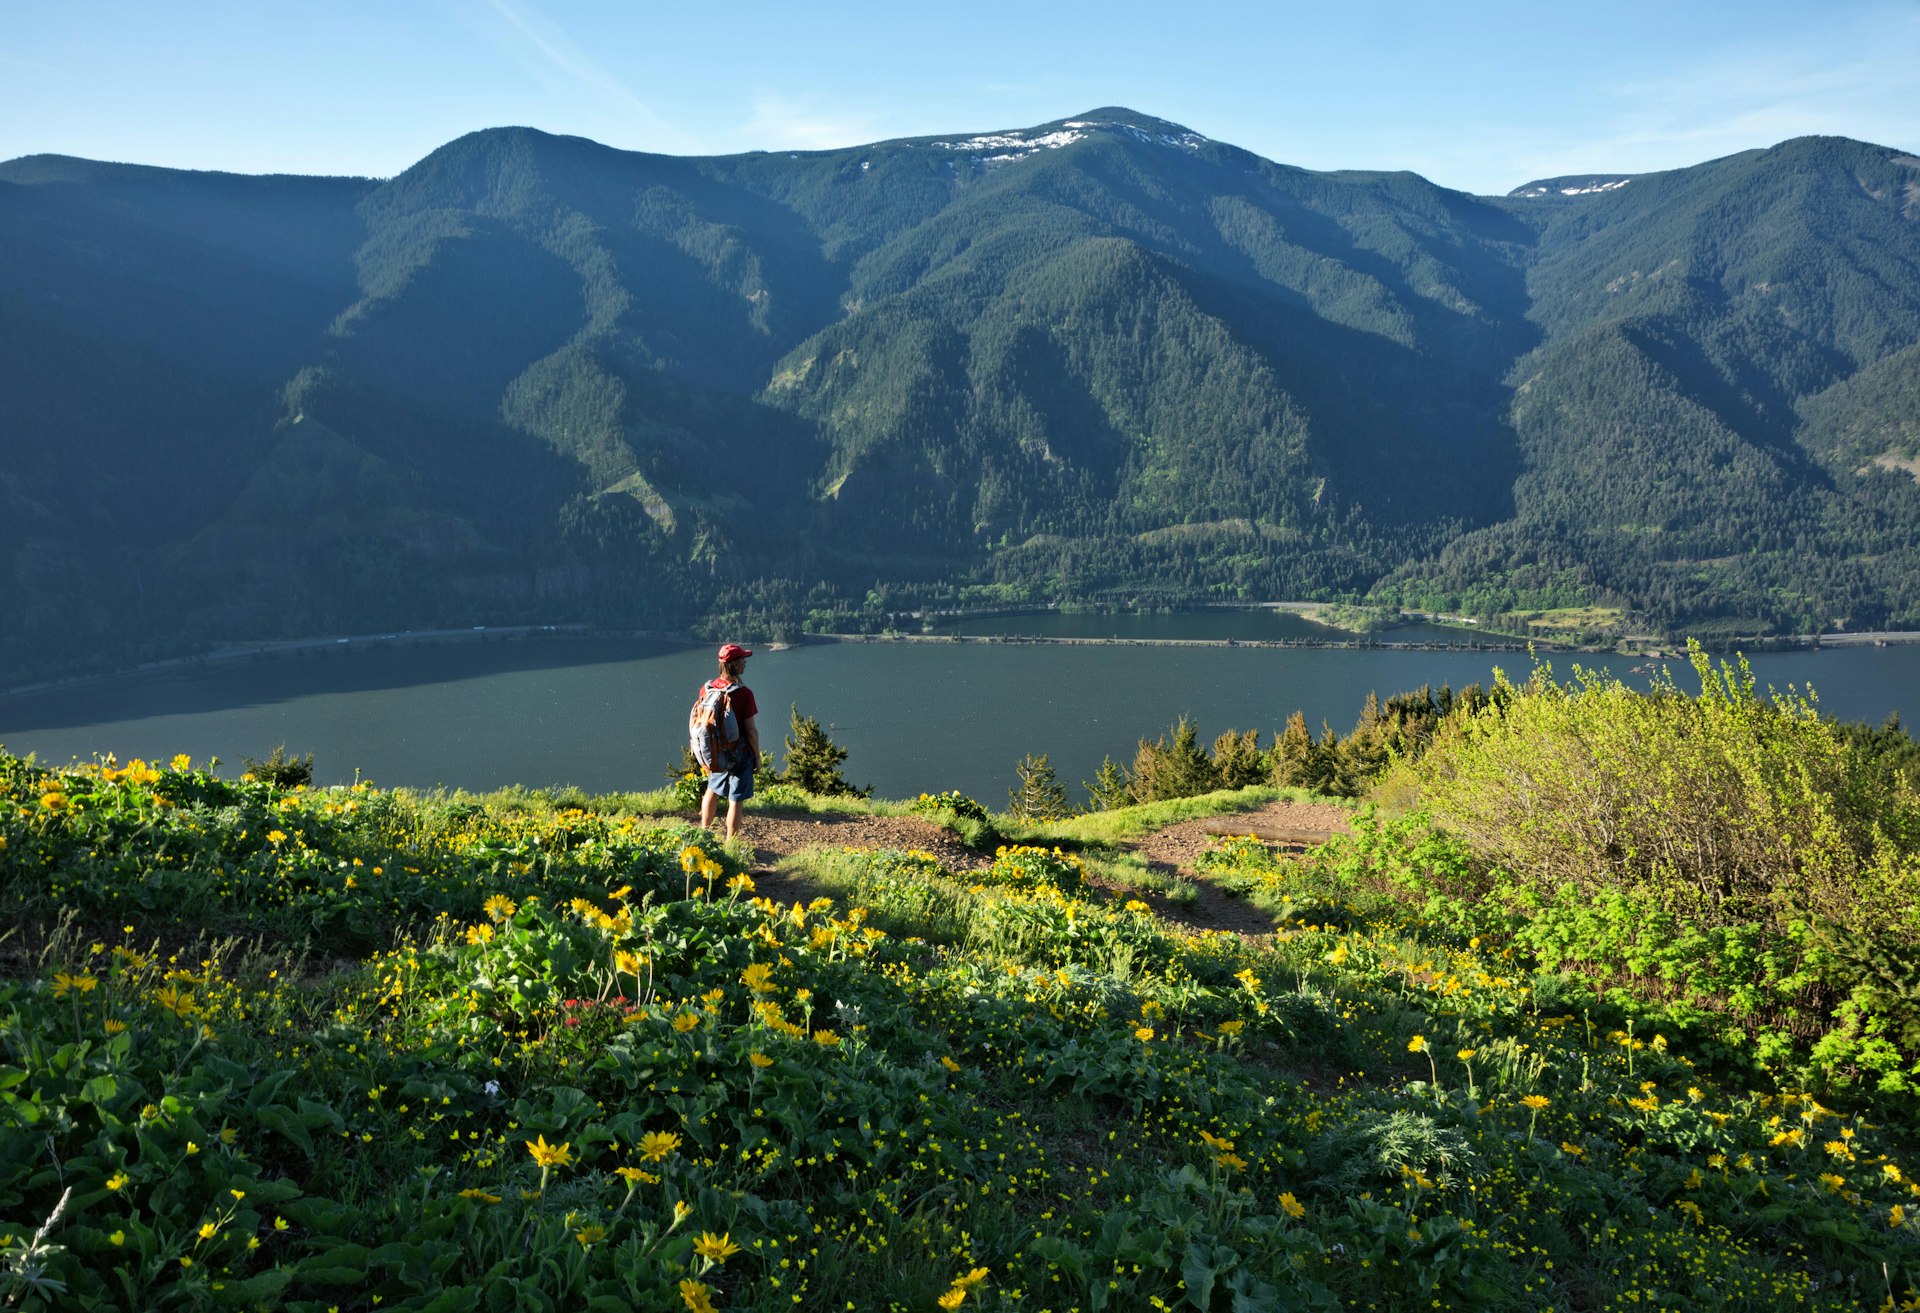 A hiker looks at the view of the Columbia River from the Dog Mountain Trail